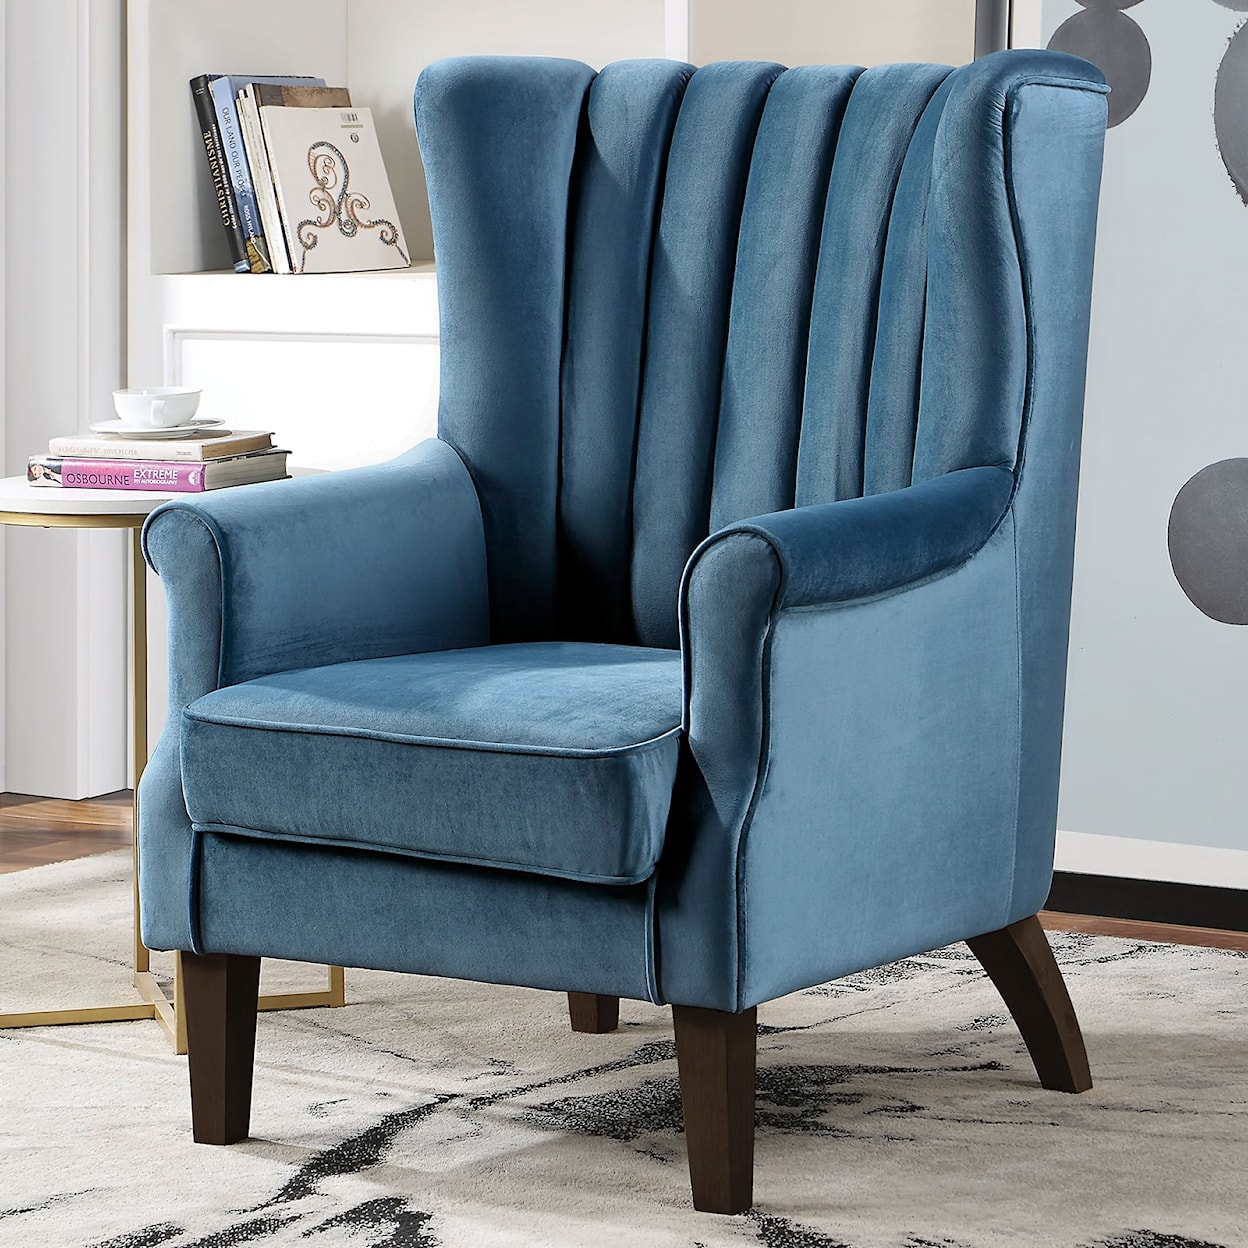 Furniture of America REYNOSA Accent Chair